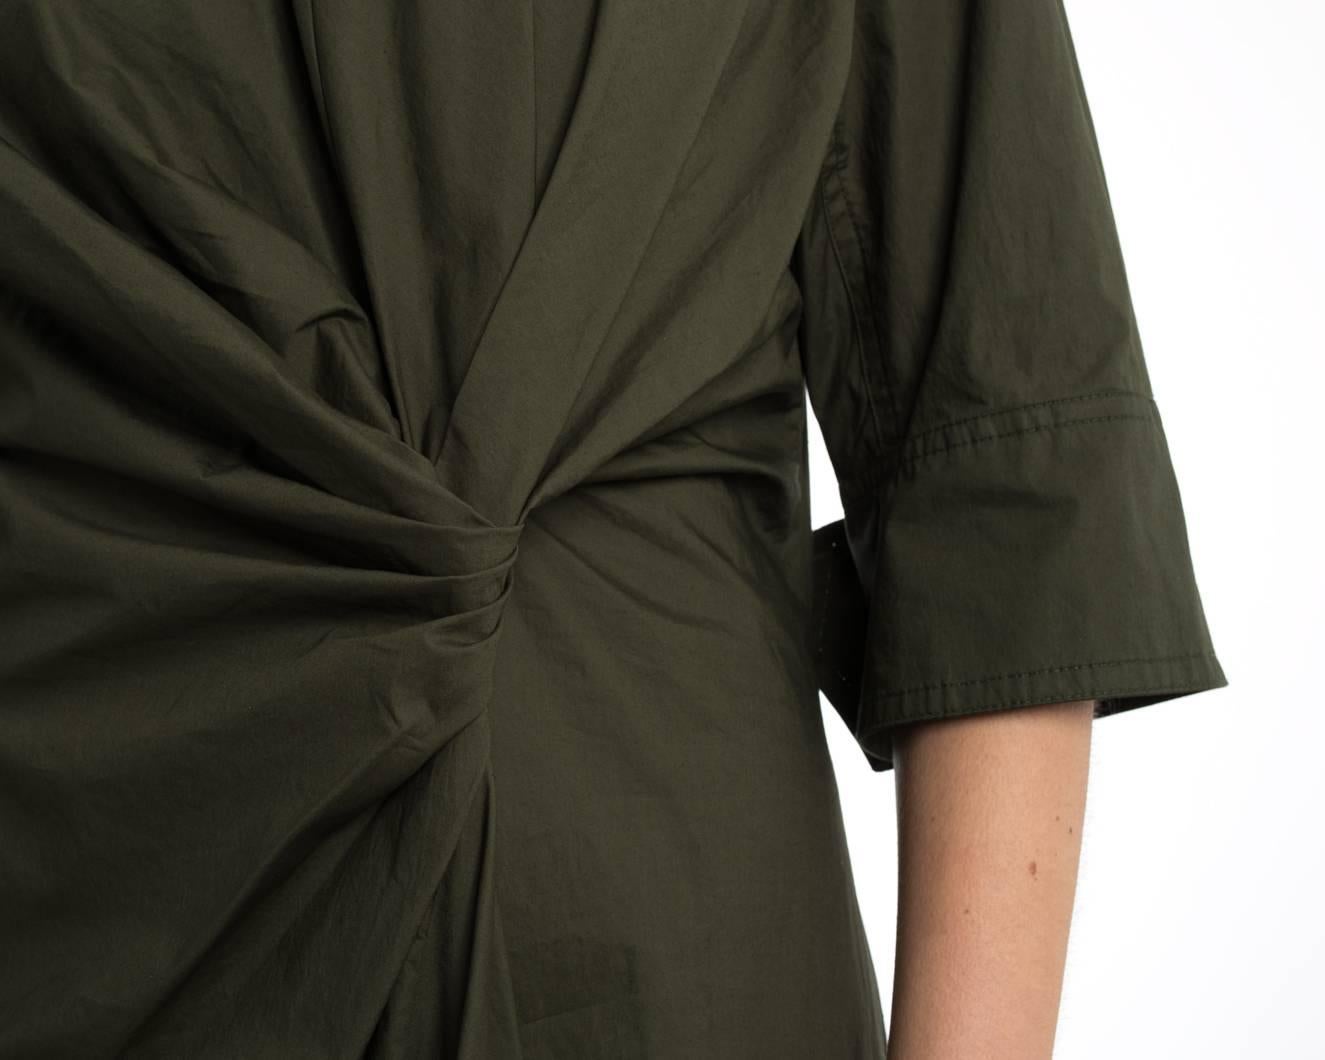 Marni Olive Green Cotton Knotted Dress with Asymetrical Hem - 8 1